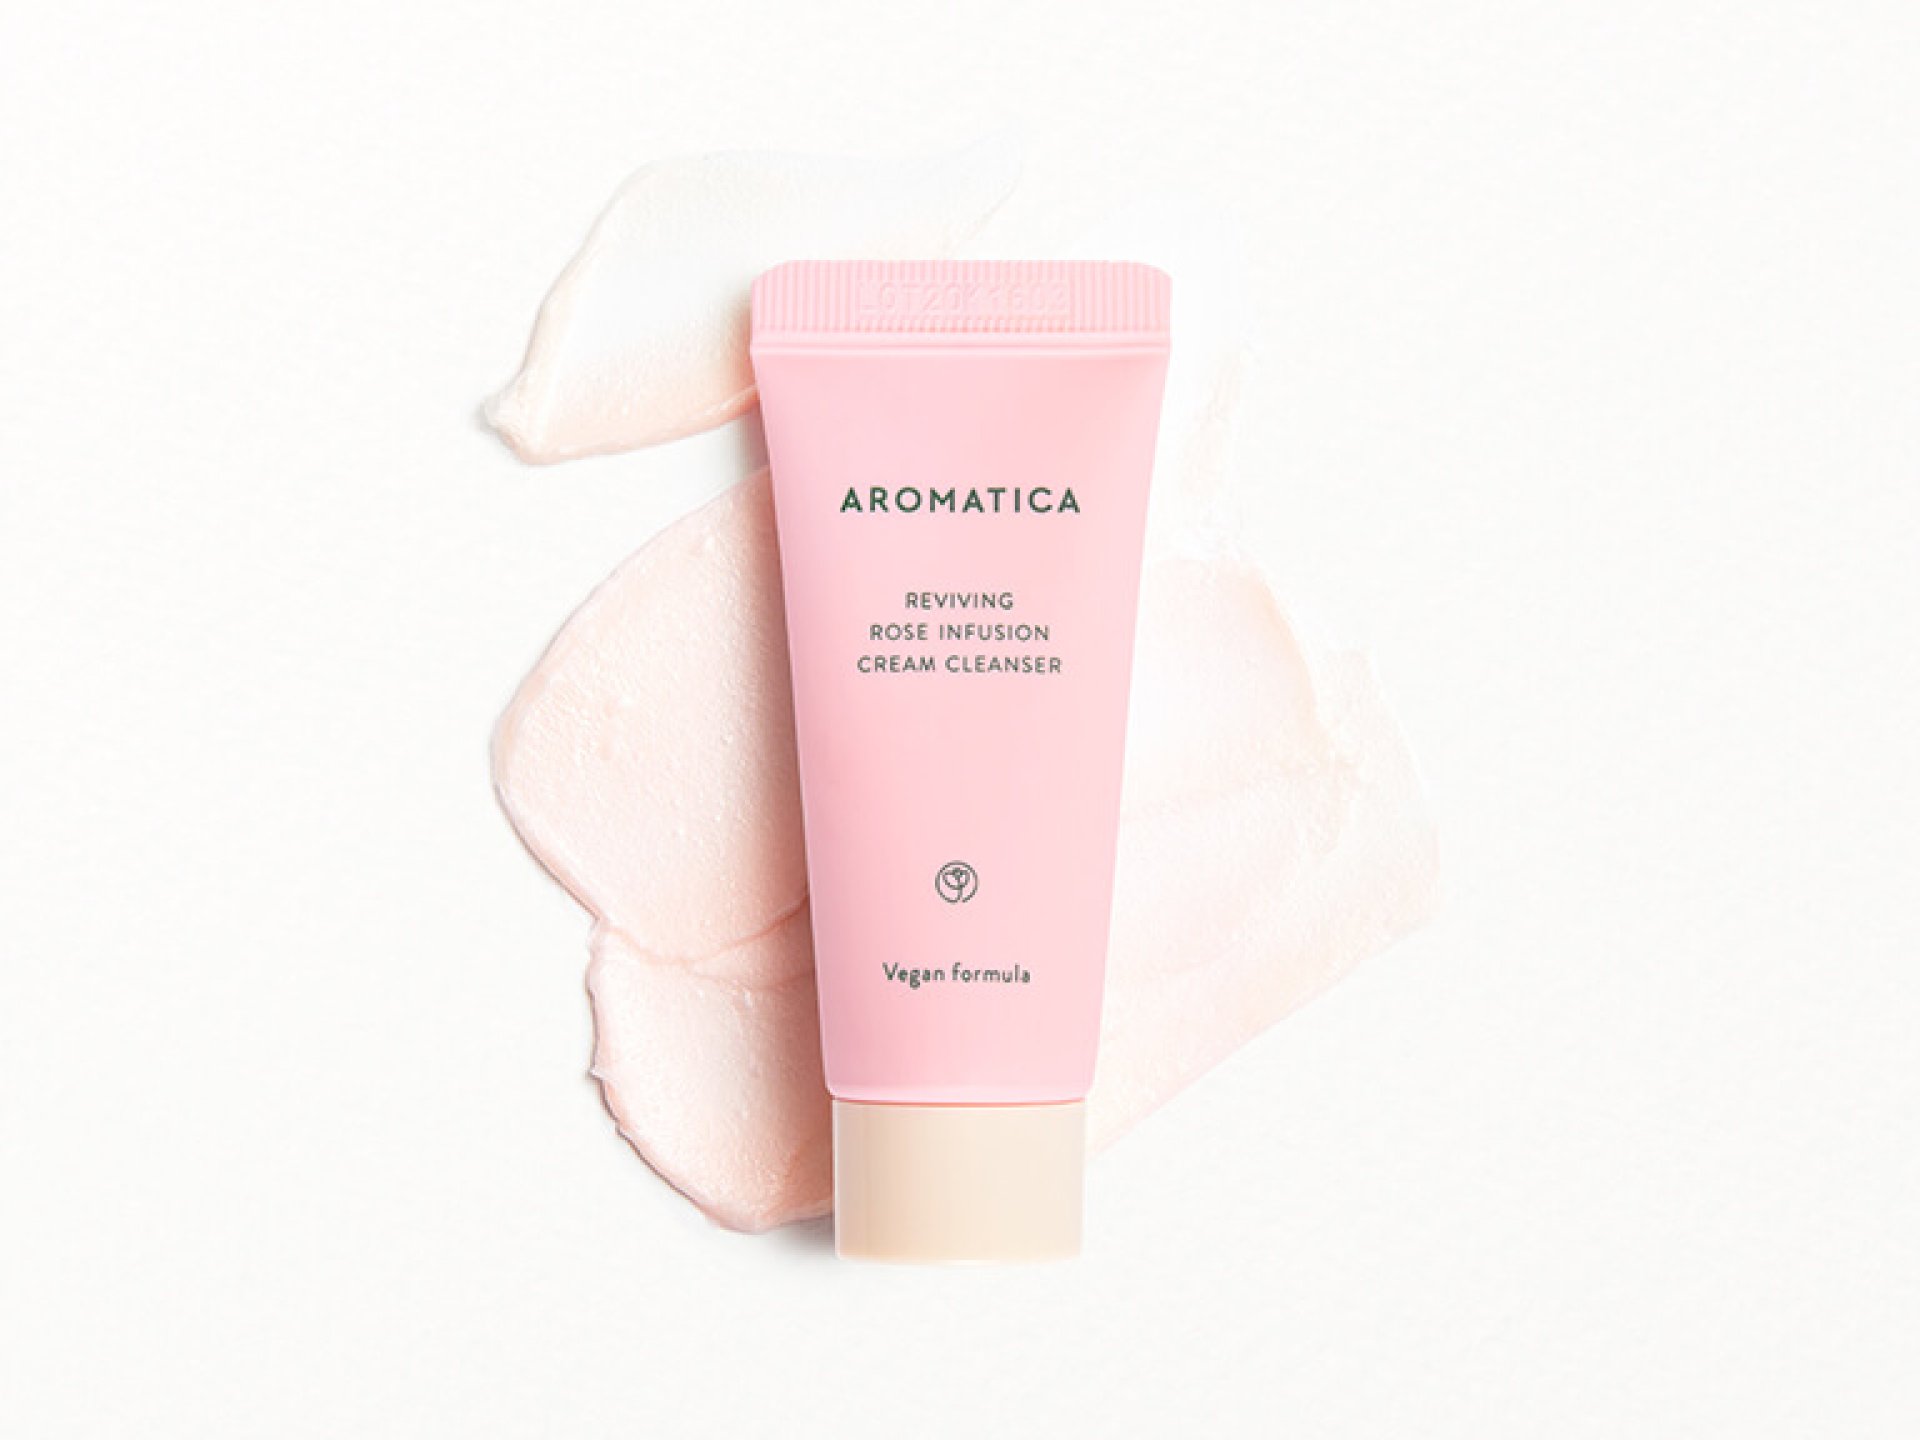 AROMATICA Reviving Rose Infusion Cream Cleanser